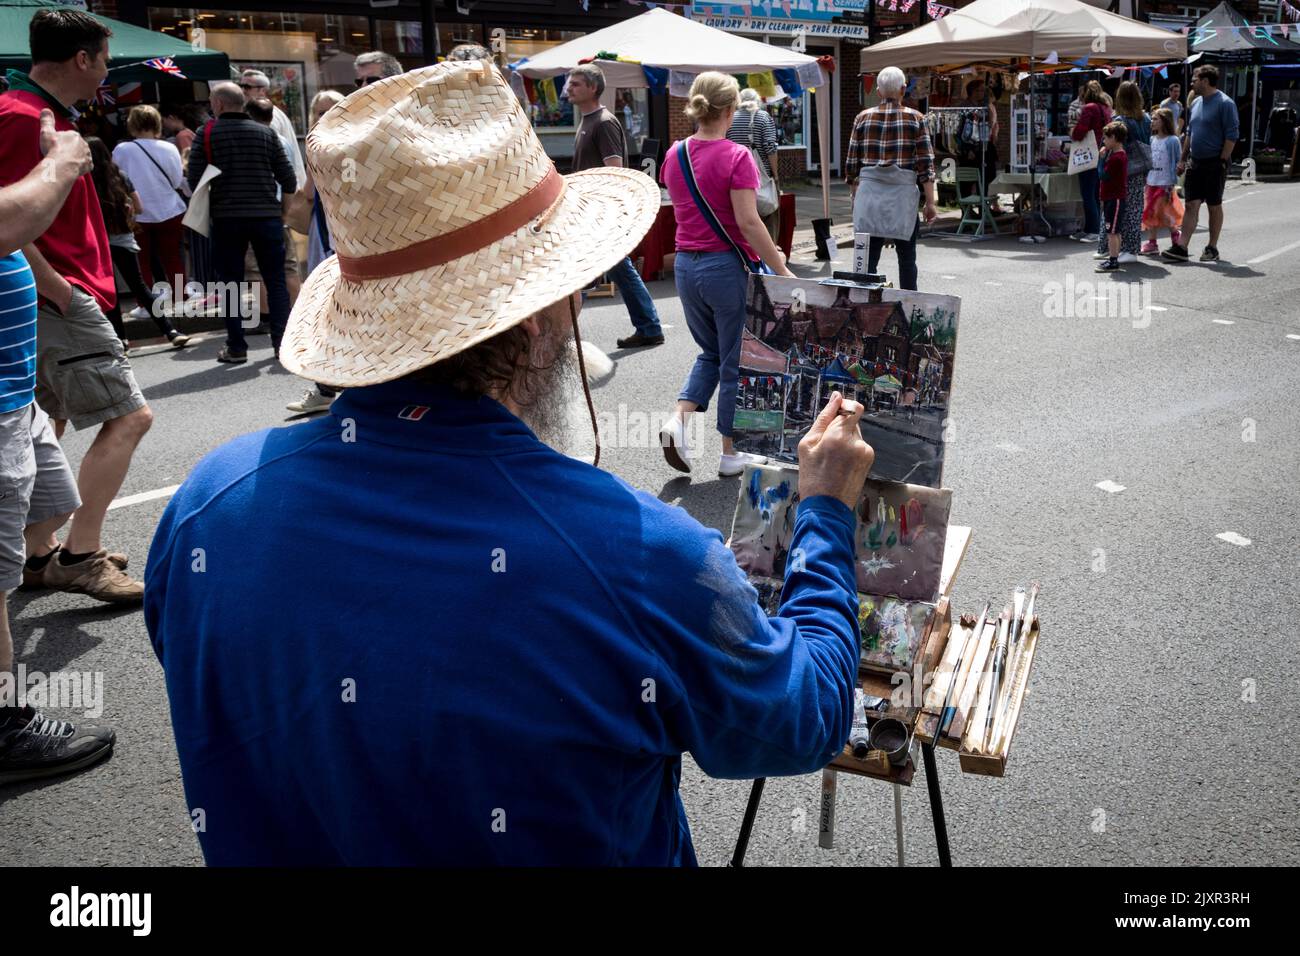 An artist paints stalls and crowds during the Haslemere Charter Fair. Stock Photo